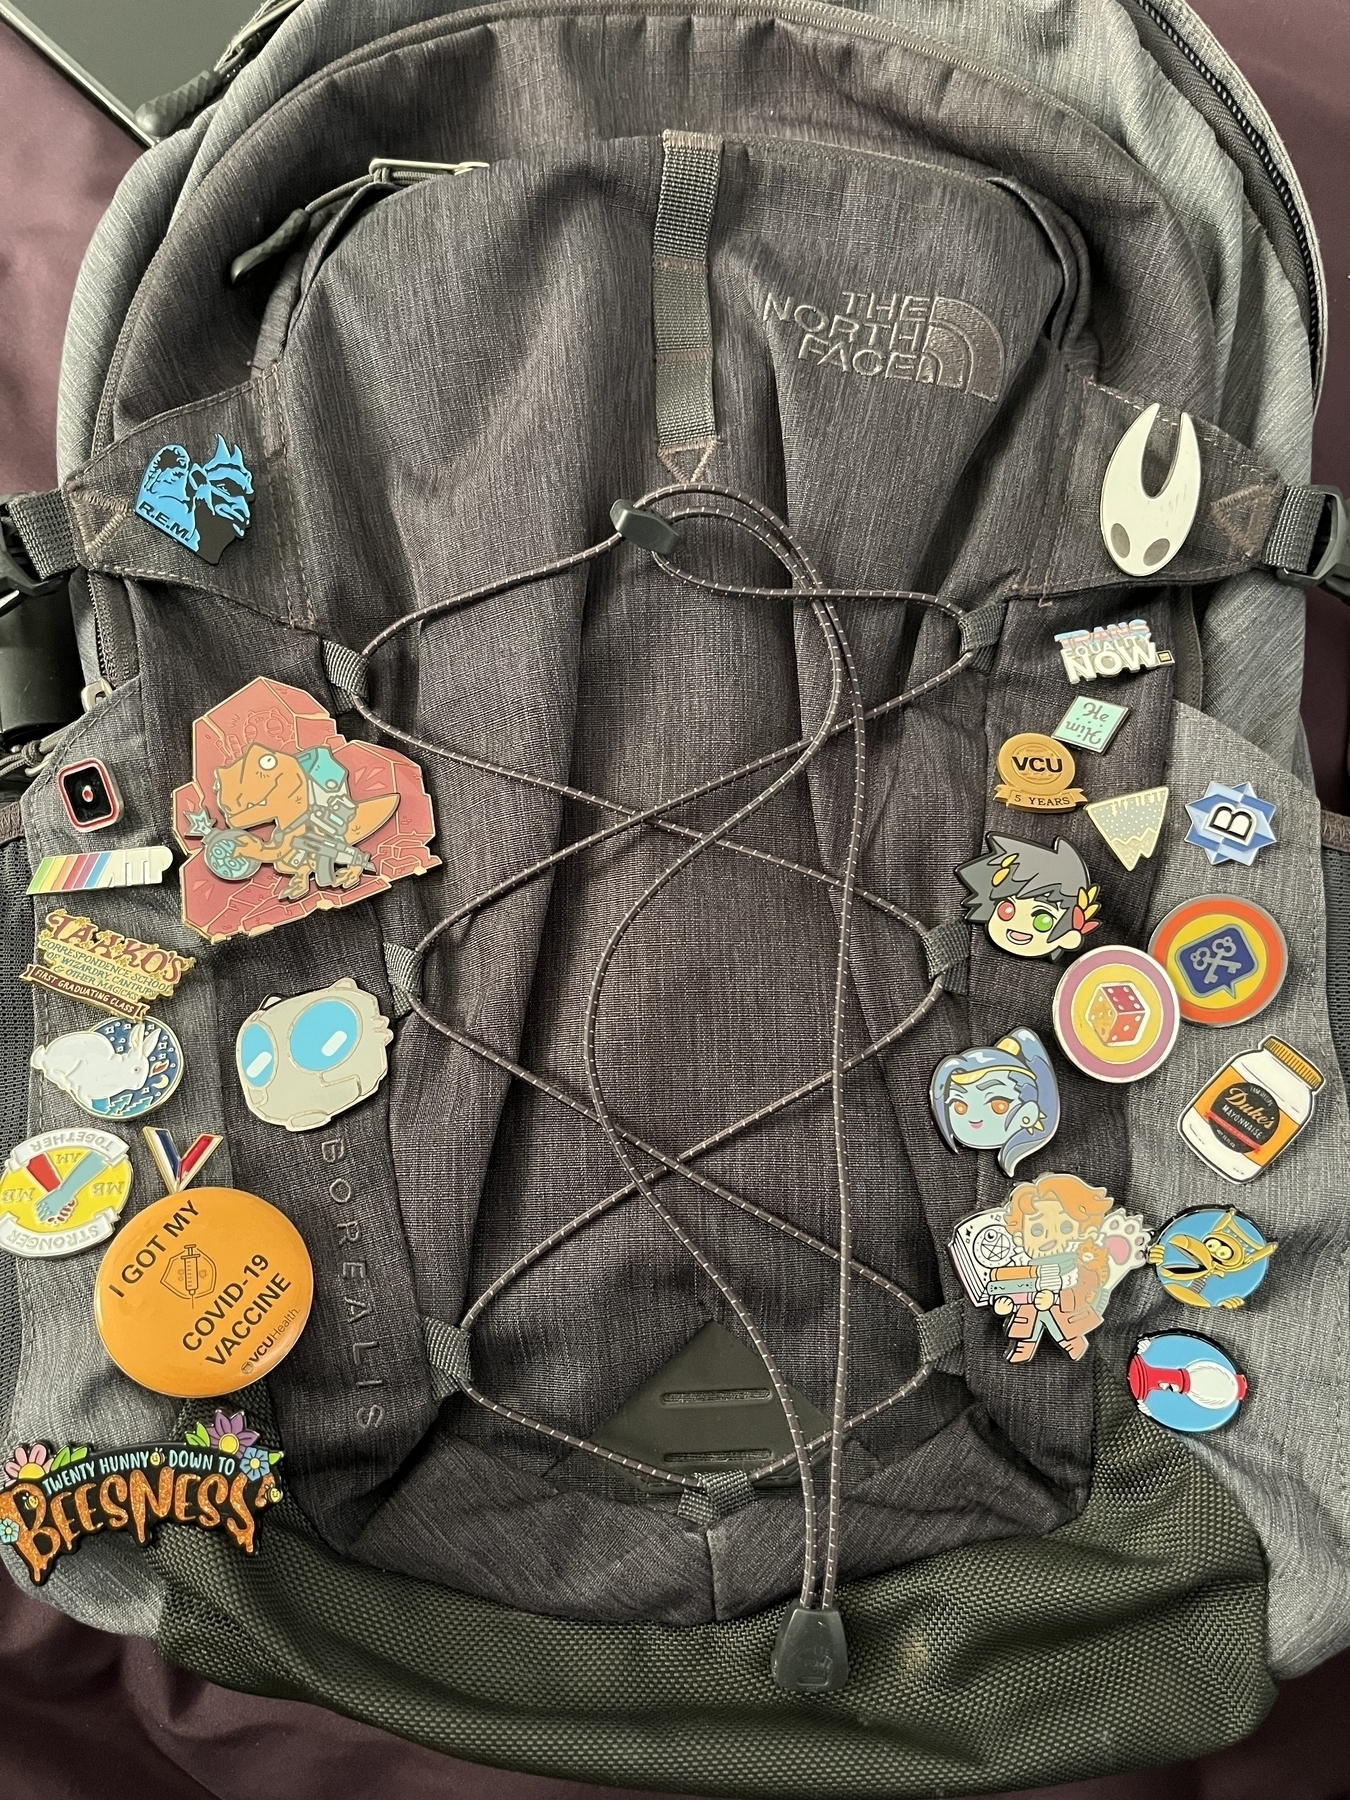 Sam’s backpack, full of pins, with the two new pins added.